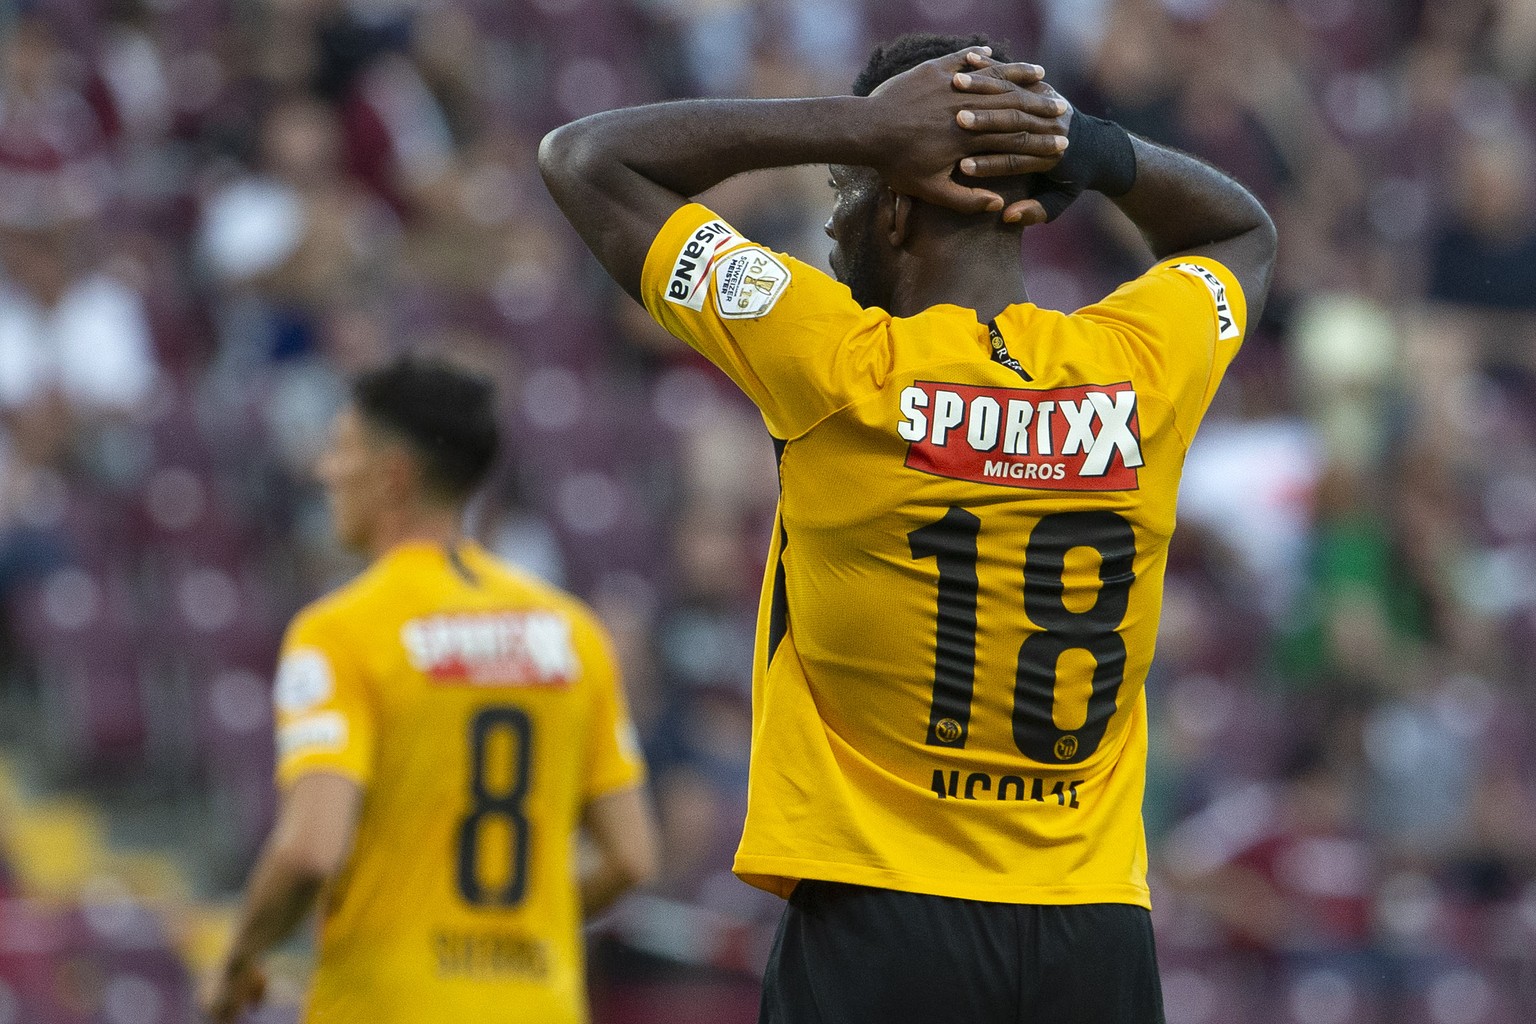 Young Boys&#039; forward Jean-Pierre Nsame #18 reacts after missing a goal, during the Super League soccer match of Swiss Championship between Servette FC and BSC Young Boys, at the Stade de Geneve st ...